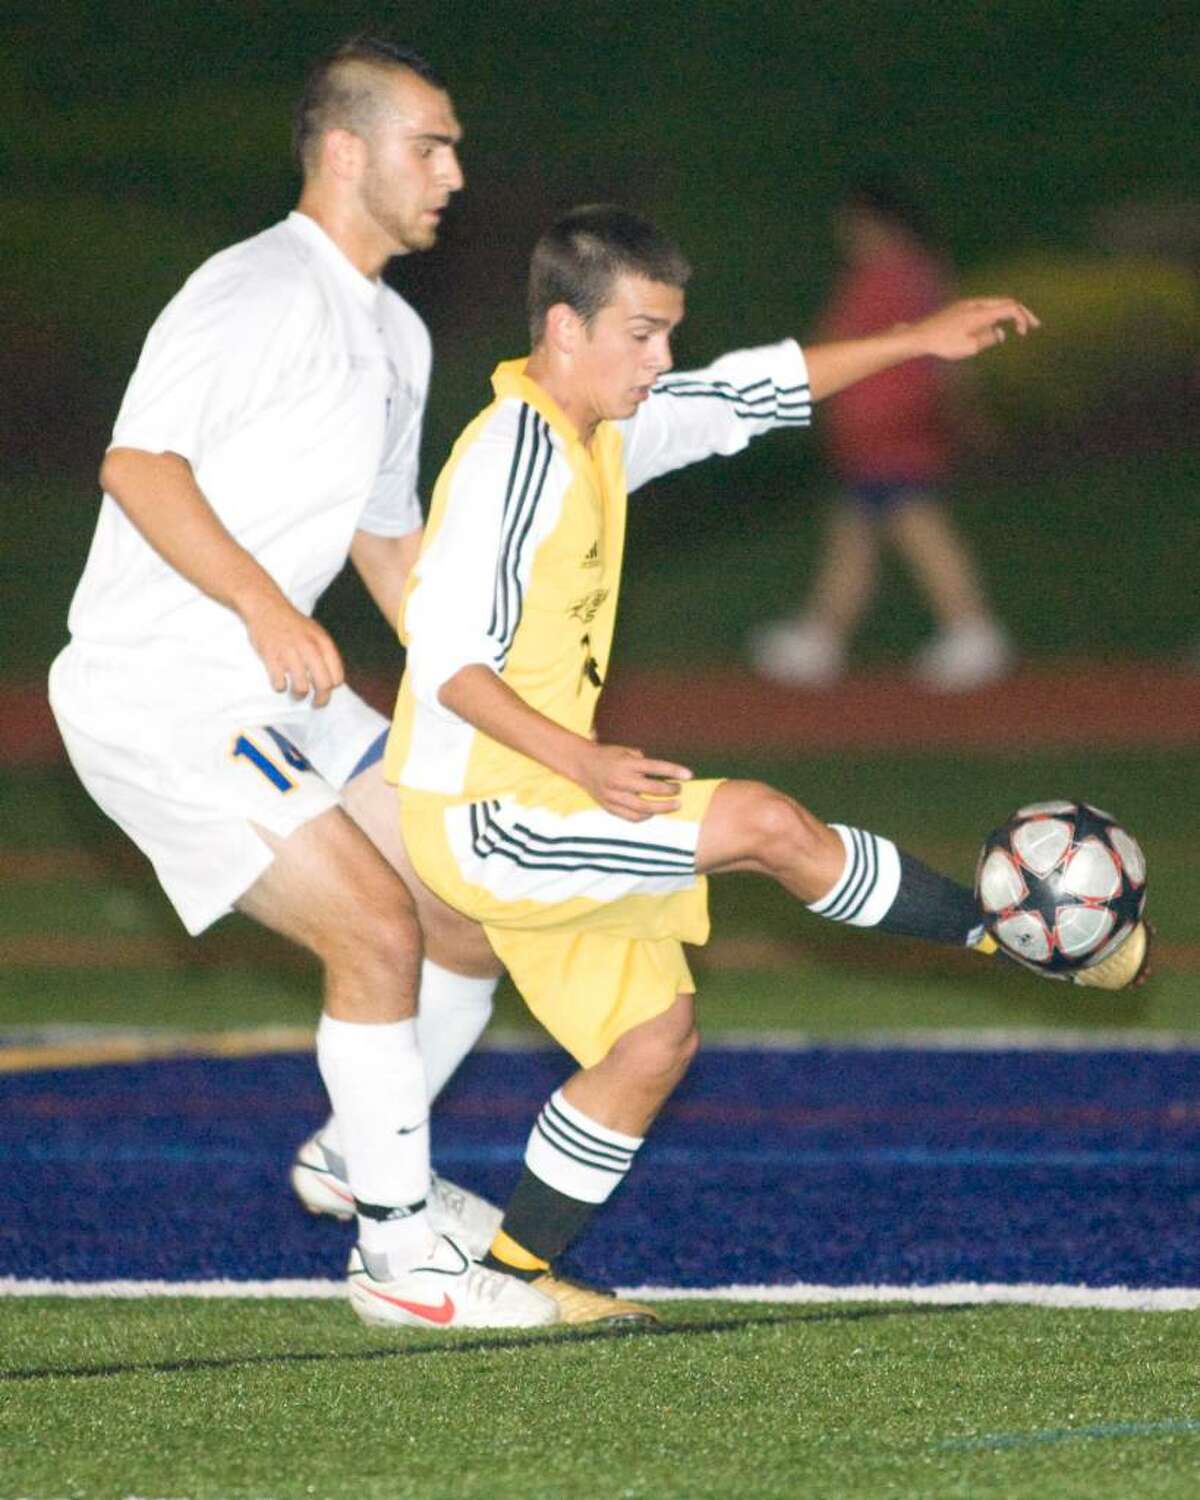 Dean Basak Smith of Joel Barlow gets a foot on the ball despite the tight marking of Brookfield's Chris Ackell Thursday night at Brookfield High.